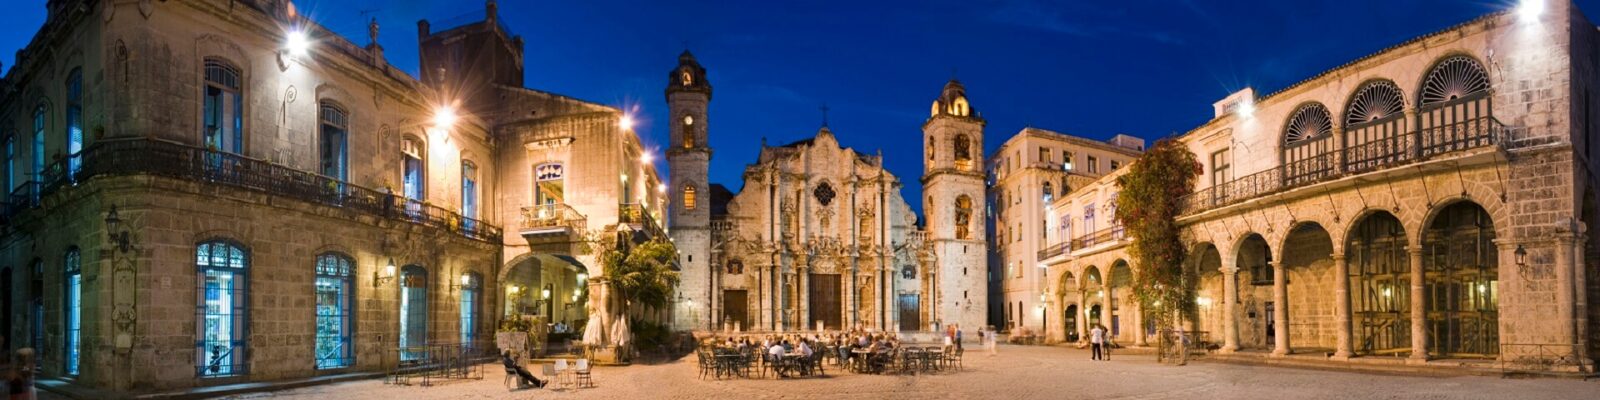 Top 5 Cultural Places to visit in Cuba